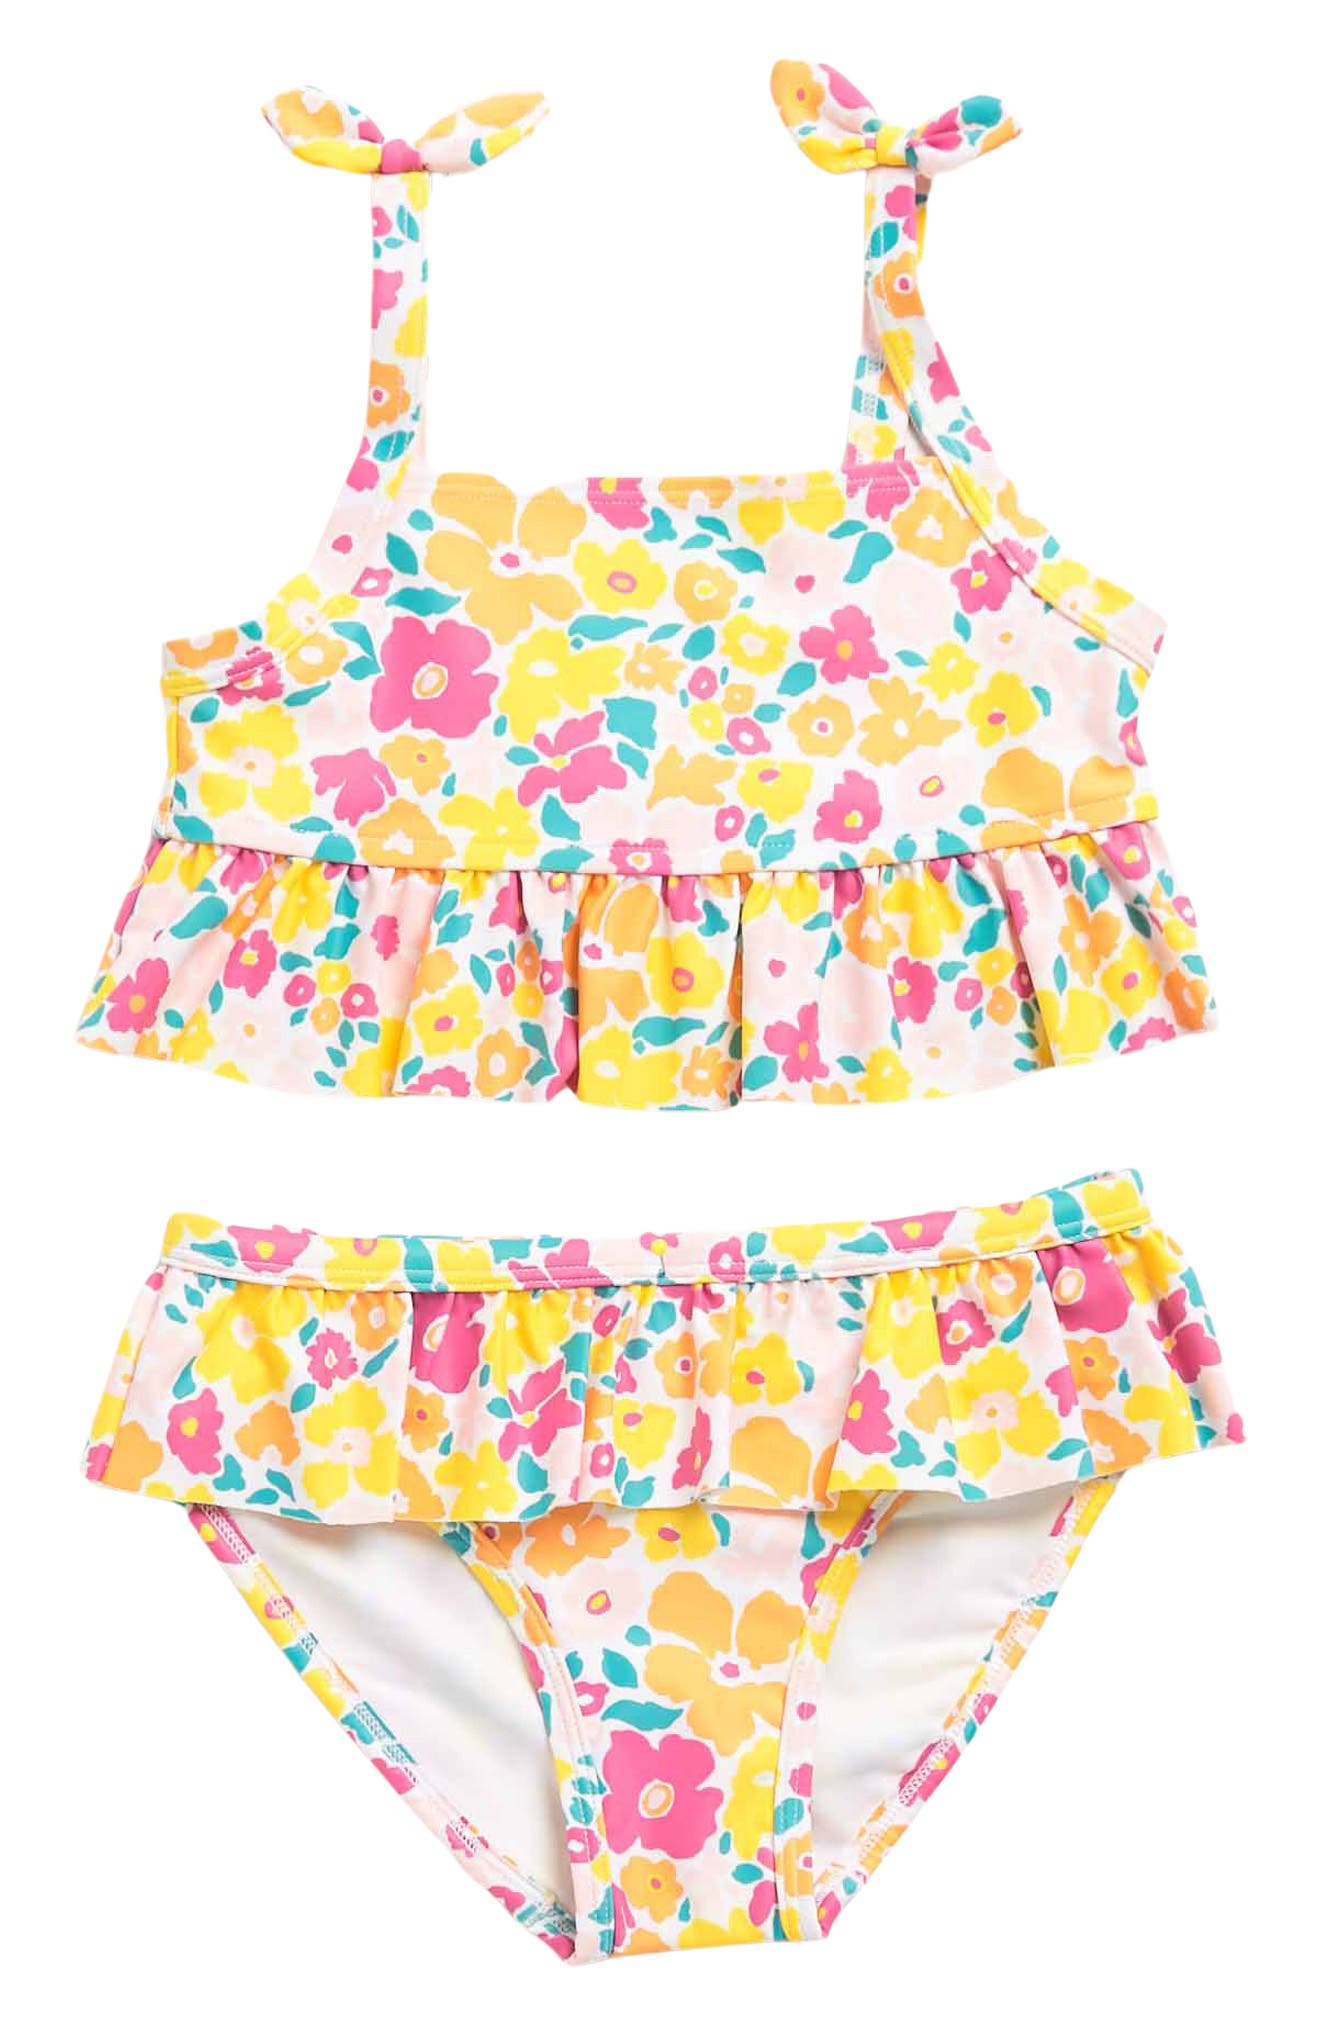 Limited Too Girls Toddler Printed Two Piece Swimsuit with Ruffle Trim